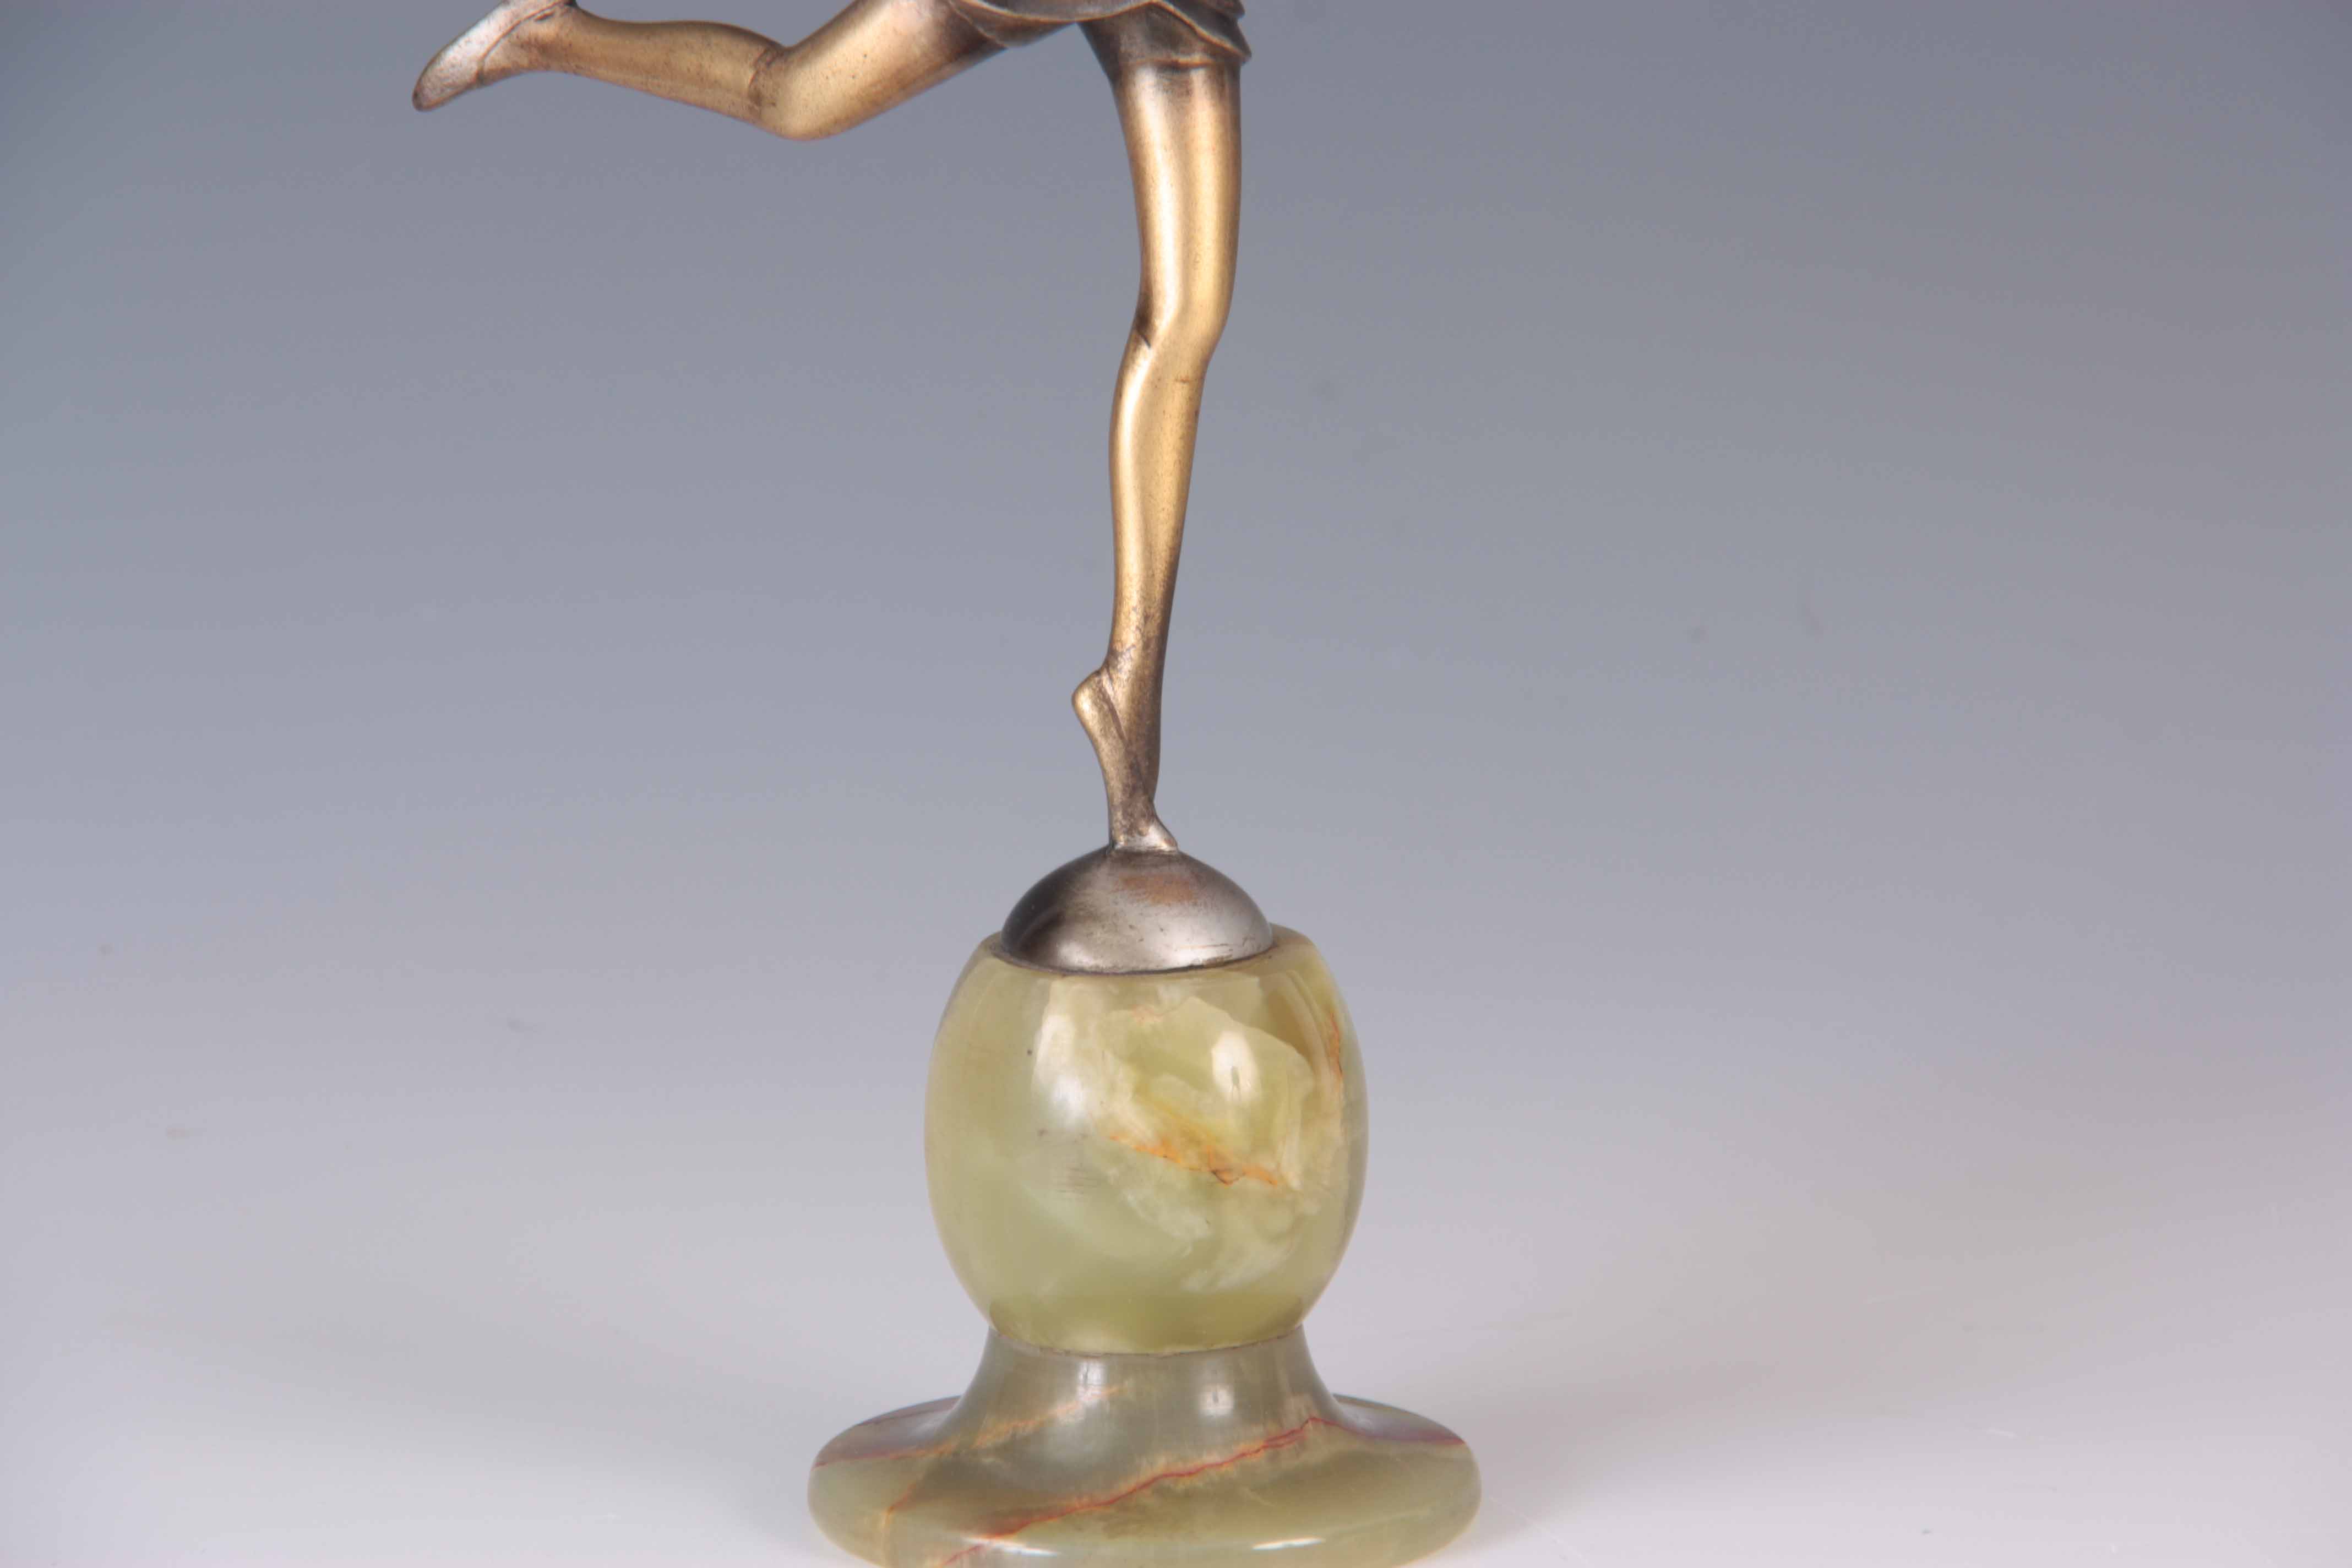 STEFAN DAKON, AUSTRIA (1904 - 1992). AN EARLY 20TH CENTURY SILVERED AND GOLD COLD PAINTED BRONZE - Image 3 of 4